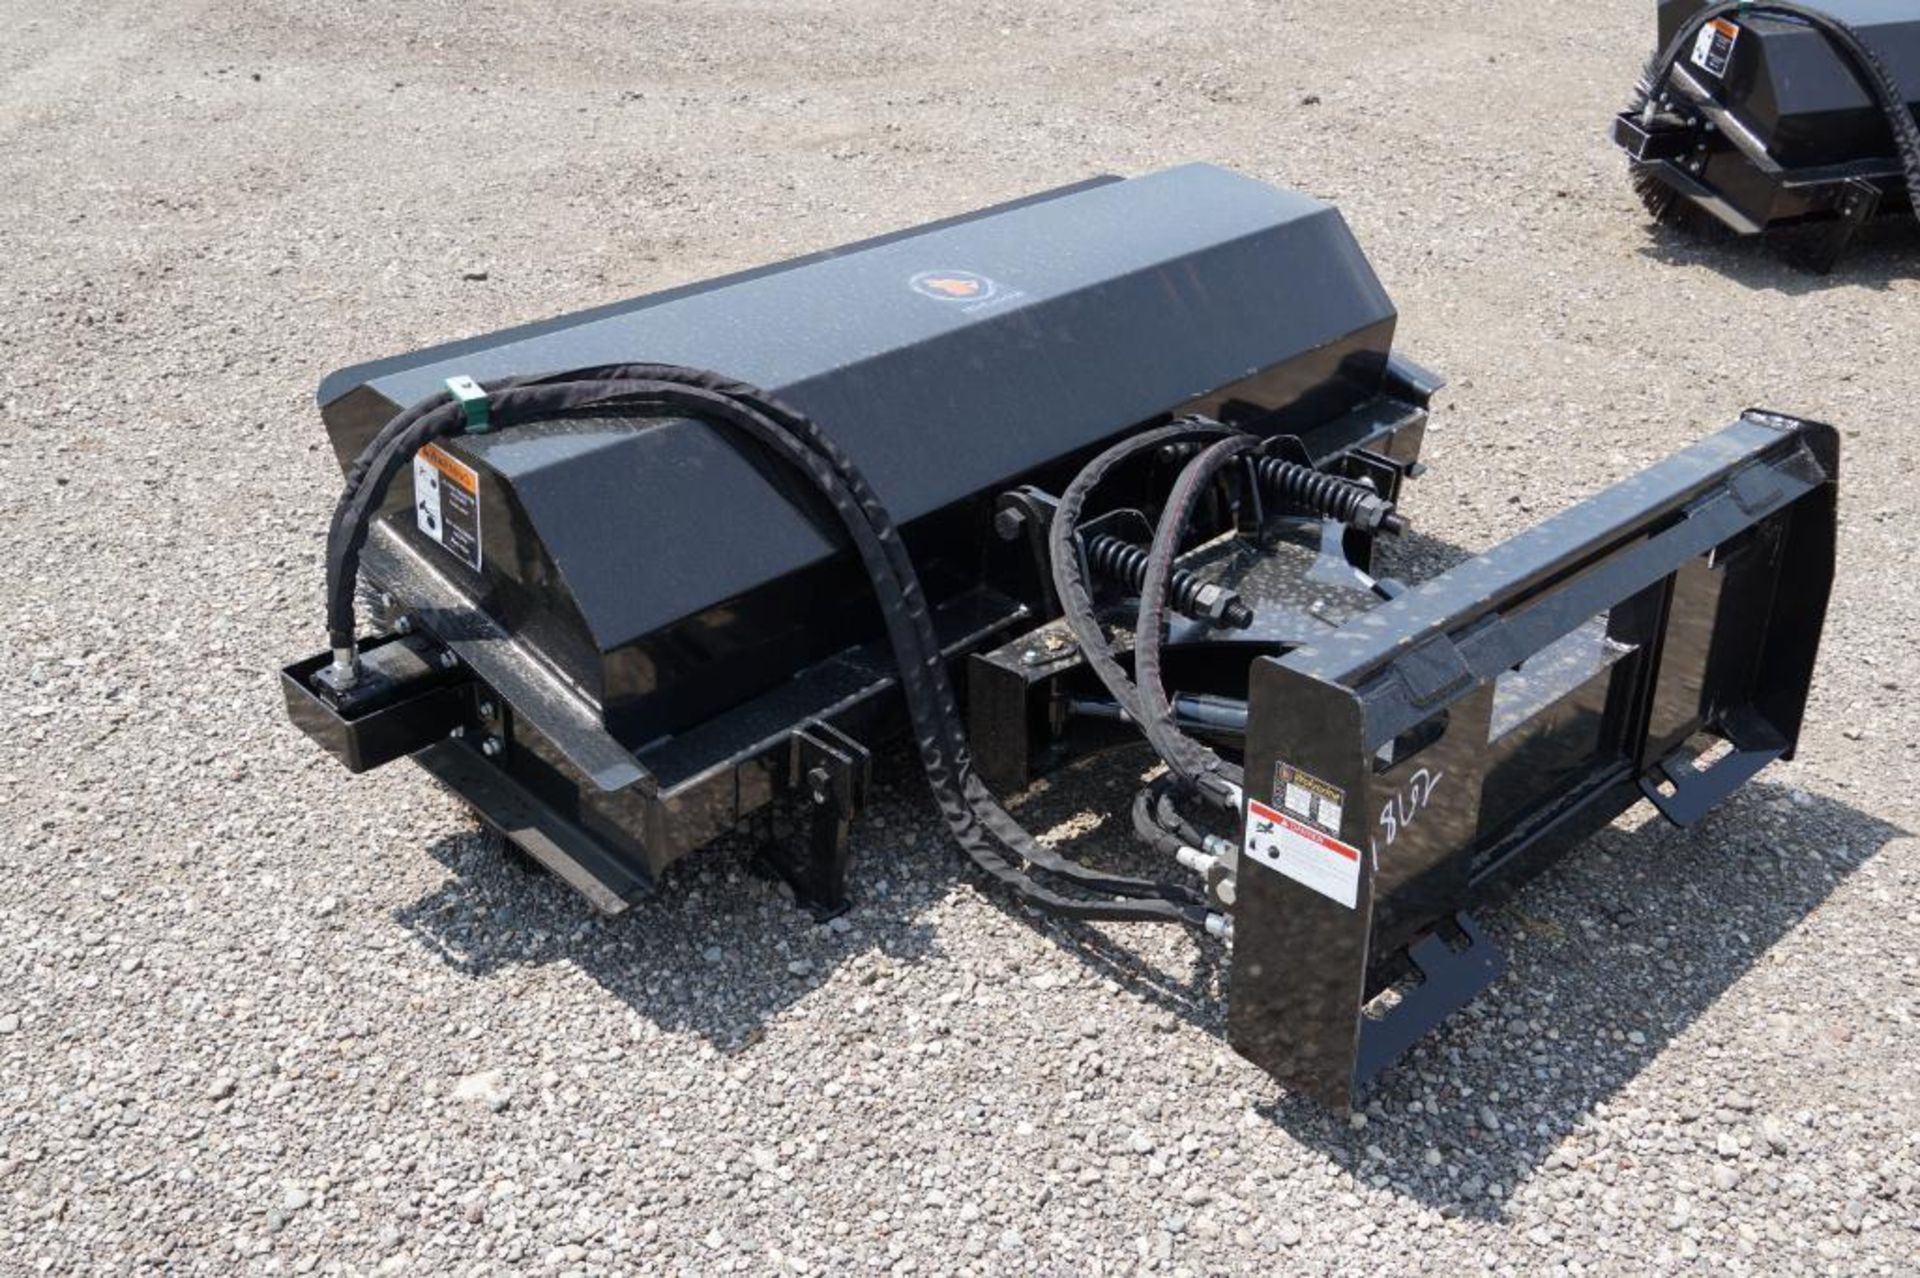 New! 2023 Wolverine Skid Steer Angle Broom Industrial Series Attachment - Image 4 of 5